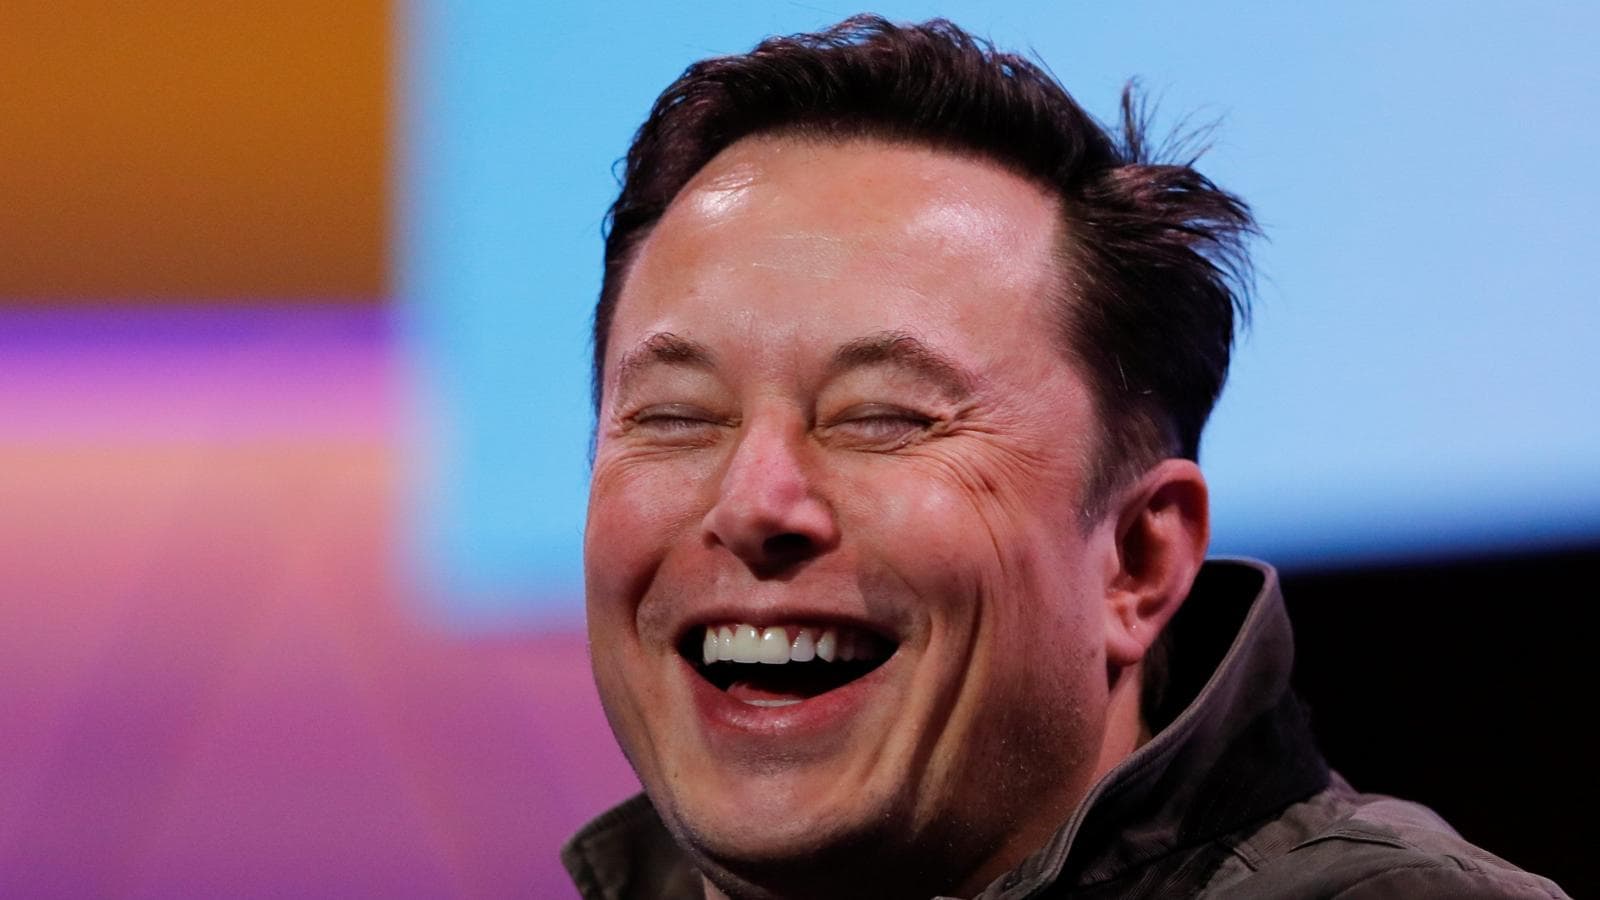 An employee challenges Elon Musk on Twitter to find out if he still works for him